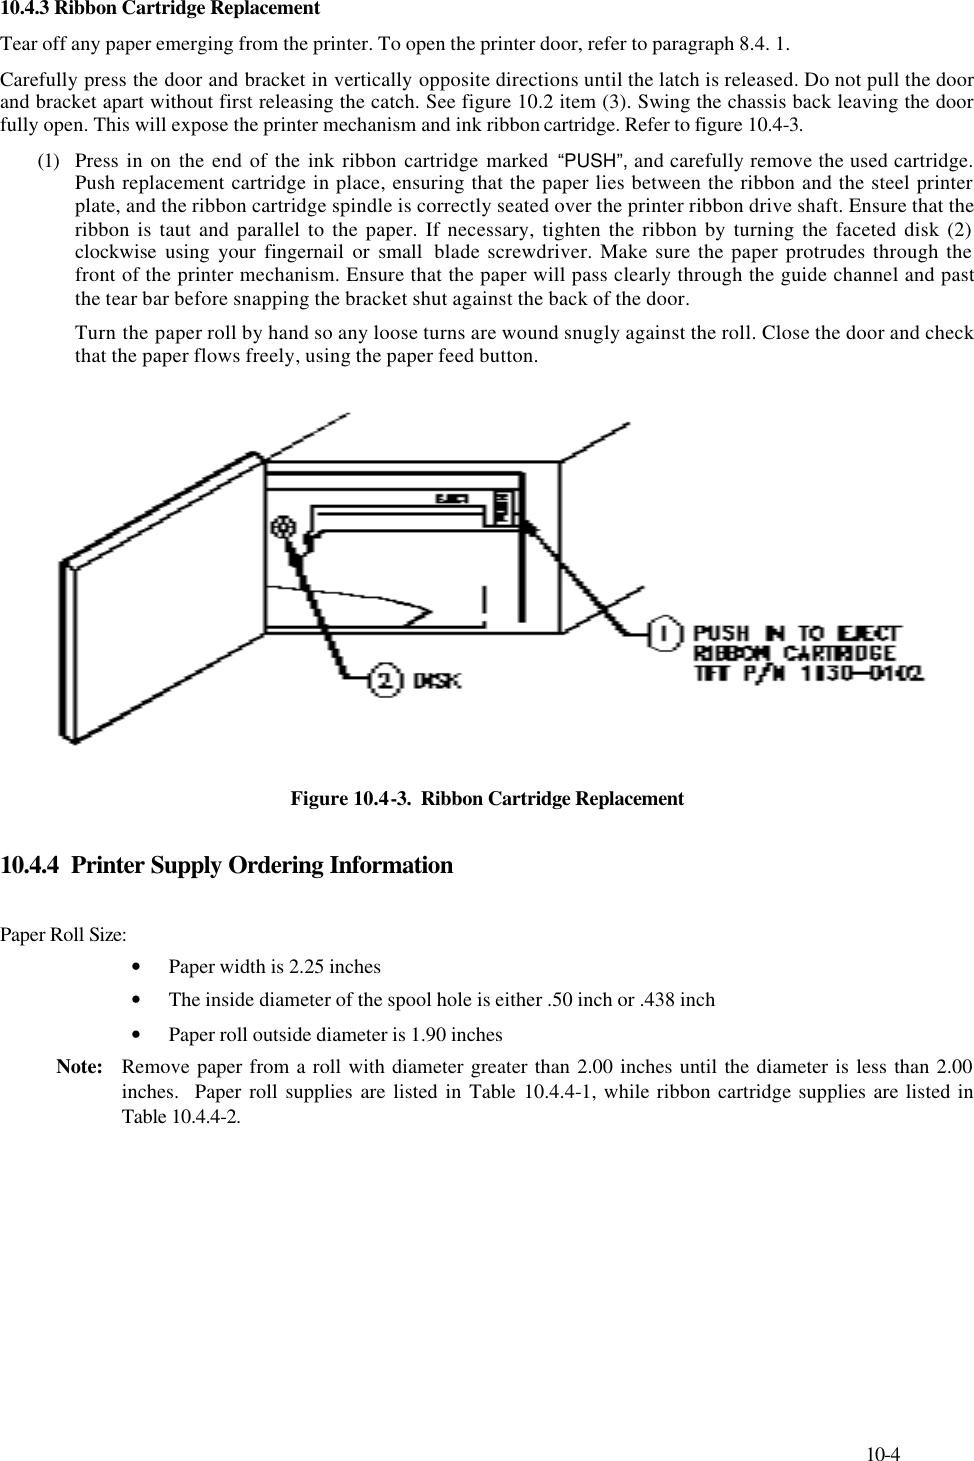     10-4 10.4.3 Ribbon Cartridge Replacement  Tear off any paper emerging from the printer. To open the printer door, refer to paragraph 8.4. 1. Carefully press the door and bracket in vertically opposite directions until the latch is released. Do not pull the door and bracket apart without first releasing the catch. See figure 10.2 item (3). Swing the chassis back leaving the door fully open. This will expose the printer mechanism and ink ribbon cartridge. Refer to figure 10.4-3. (1)  Press in on the end of the ink ribbon cartridge marked “PUSH”, and carefully remove the used cartridge. Push replacement cartridge in place, ensuring that the paper lies between the ribbon and the steel printer plate, and the ribbon cartridge spindle is correctly seated over the printer ribbon drive shaft. Ensure that the ribbon is taut and parallel to the paper. If necessary, tighten the ribbon by turning the faceted disk (2) clockwise using your fingernail or small  blade screwdriver. Make sure the paper protrudes through the front of the printer mechanism. Ensure that the paper will pass clearly through the guide channel and past the tear bar before snapping the bracket shut against the back of the door. Turn the paper roll by hand so any loose turns are wound snugly against the roll. Close the door and check that the paper flows freely, using the paper feed button.  Figure 10.4-3.  Ribbon Cartridge Replacement  10.4.4  Printer Supply Ordering Information  Paper Roll Size:   • Paper width is 2.25 inches • The inside diameter of the spool hole is either .50 inch or .438 inch • Paper roll outside diameter is 1.90 inches Note: Remove paper from a roll with diameter greater than 2.00 inches until the diameter is less than 2.00  inches.  Paper roll supplies are listed in Table 10.4.4-1, while ribbon cartridge supplies are listed in  Table 10.4.4-2. 